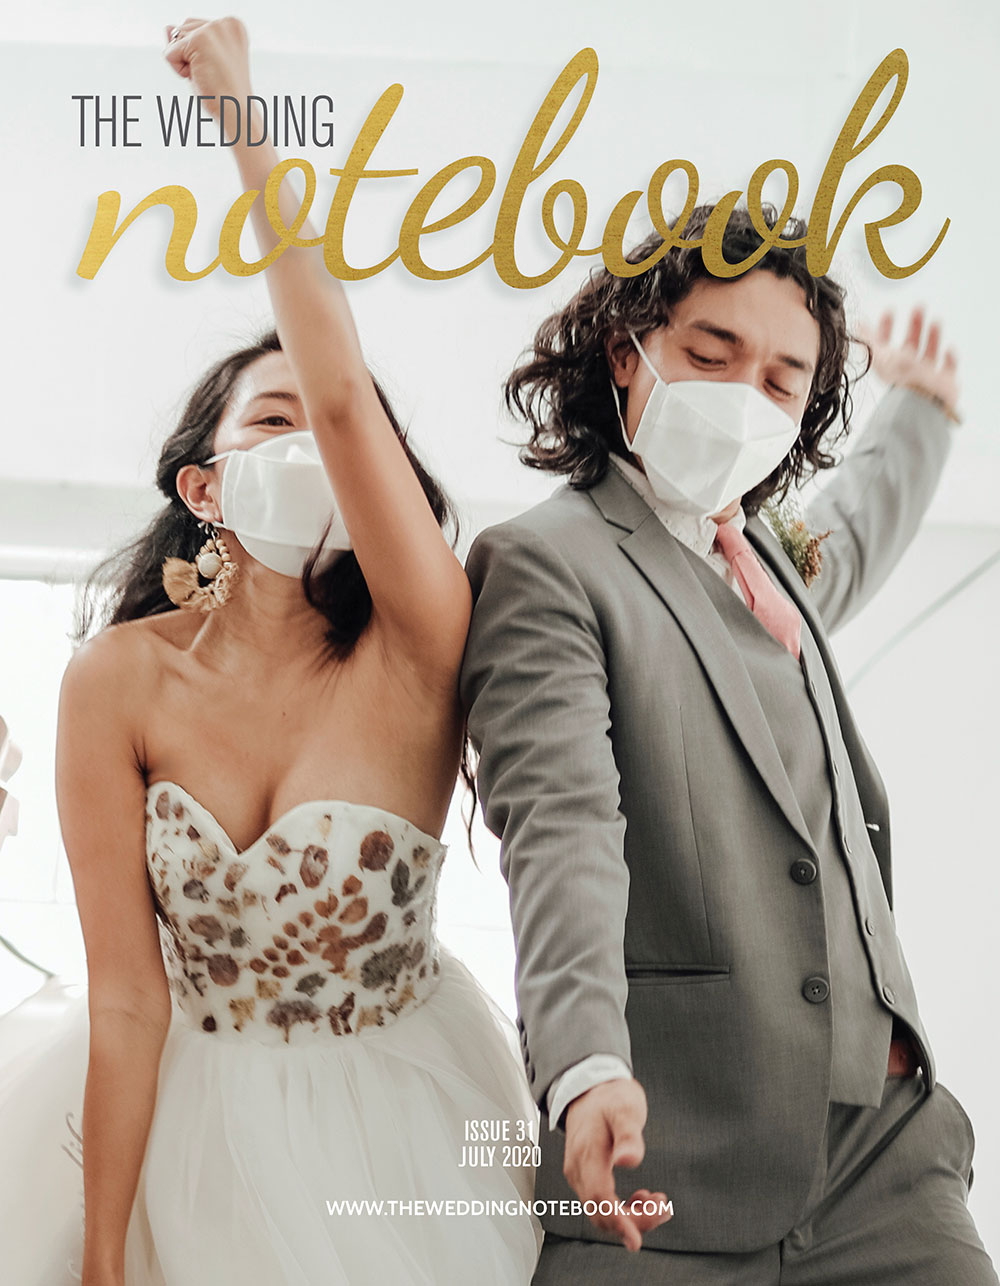 The Wedding Notebook Covid-19 issue